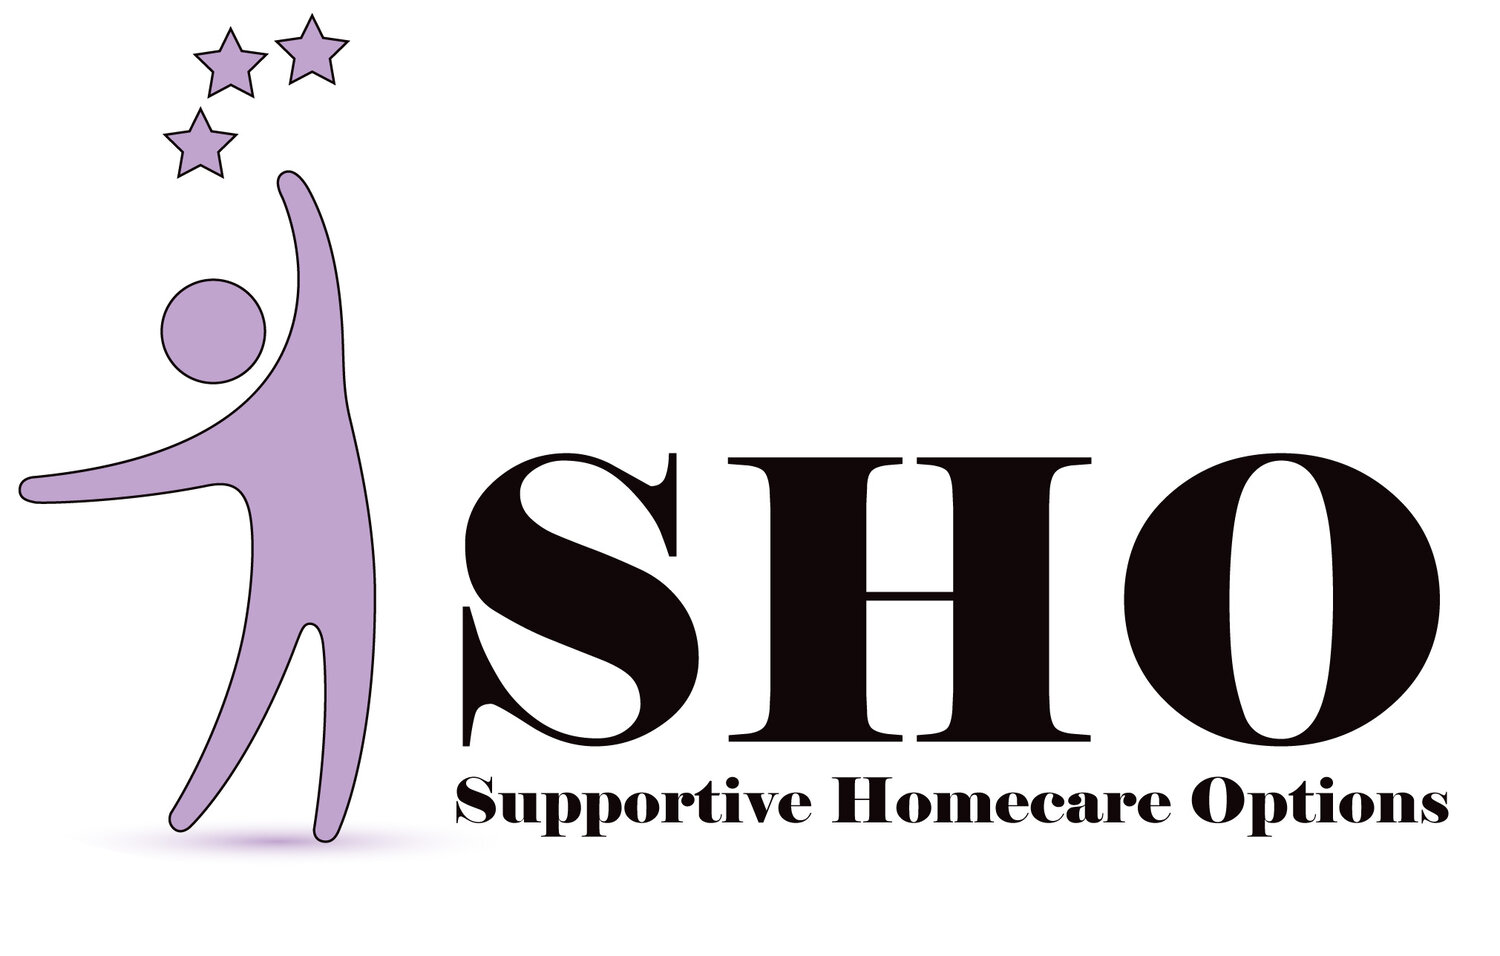 Supportive Homecare Options